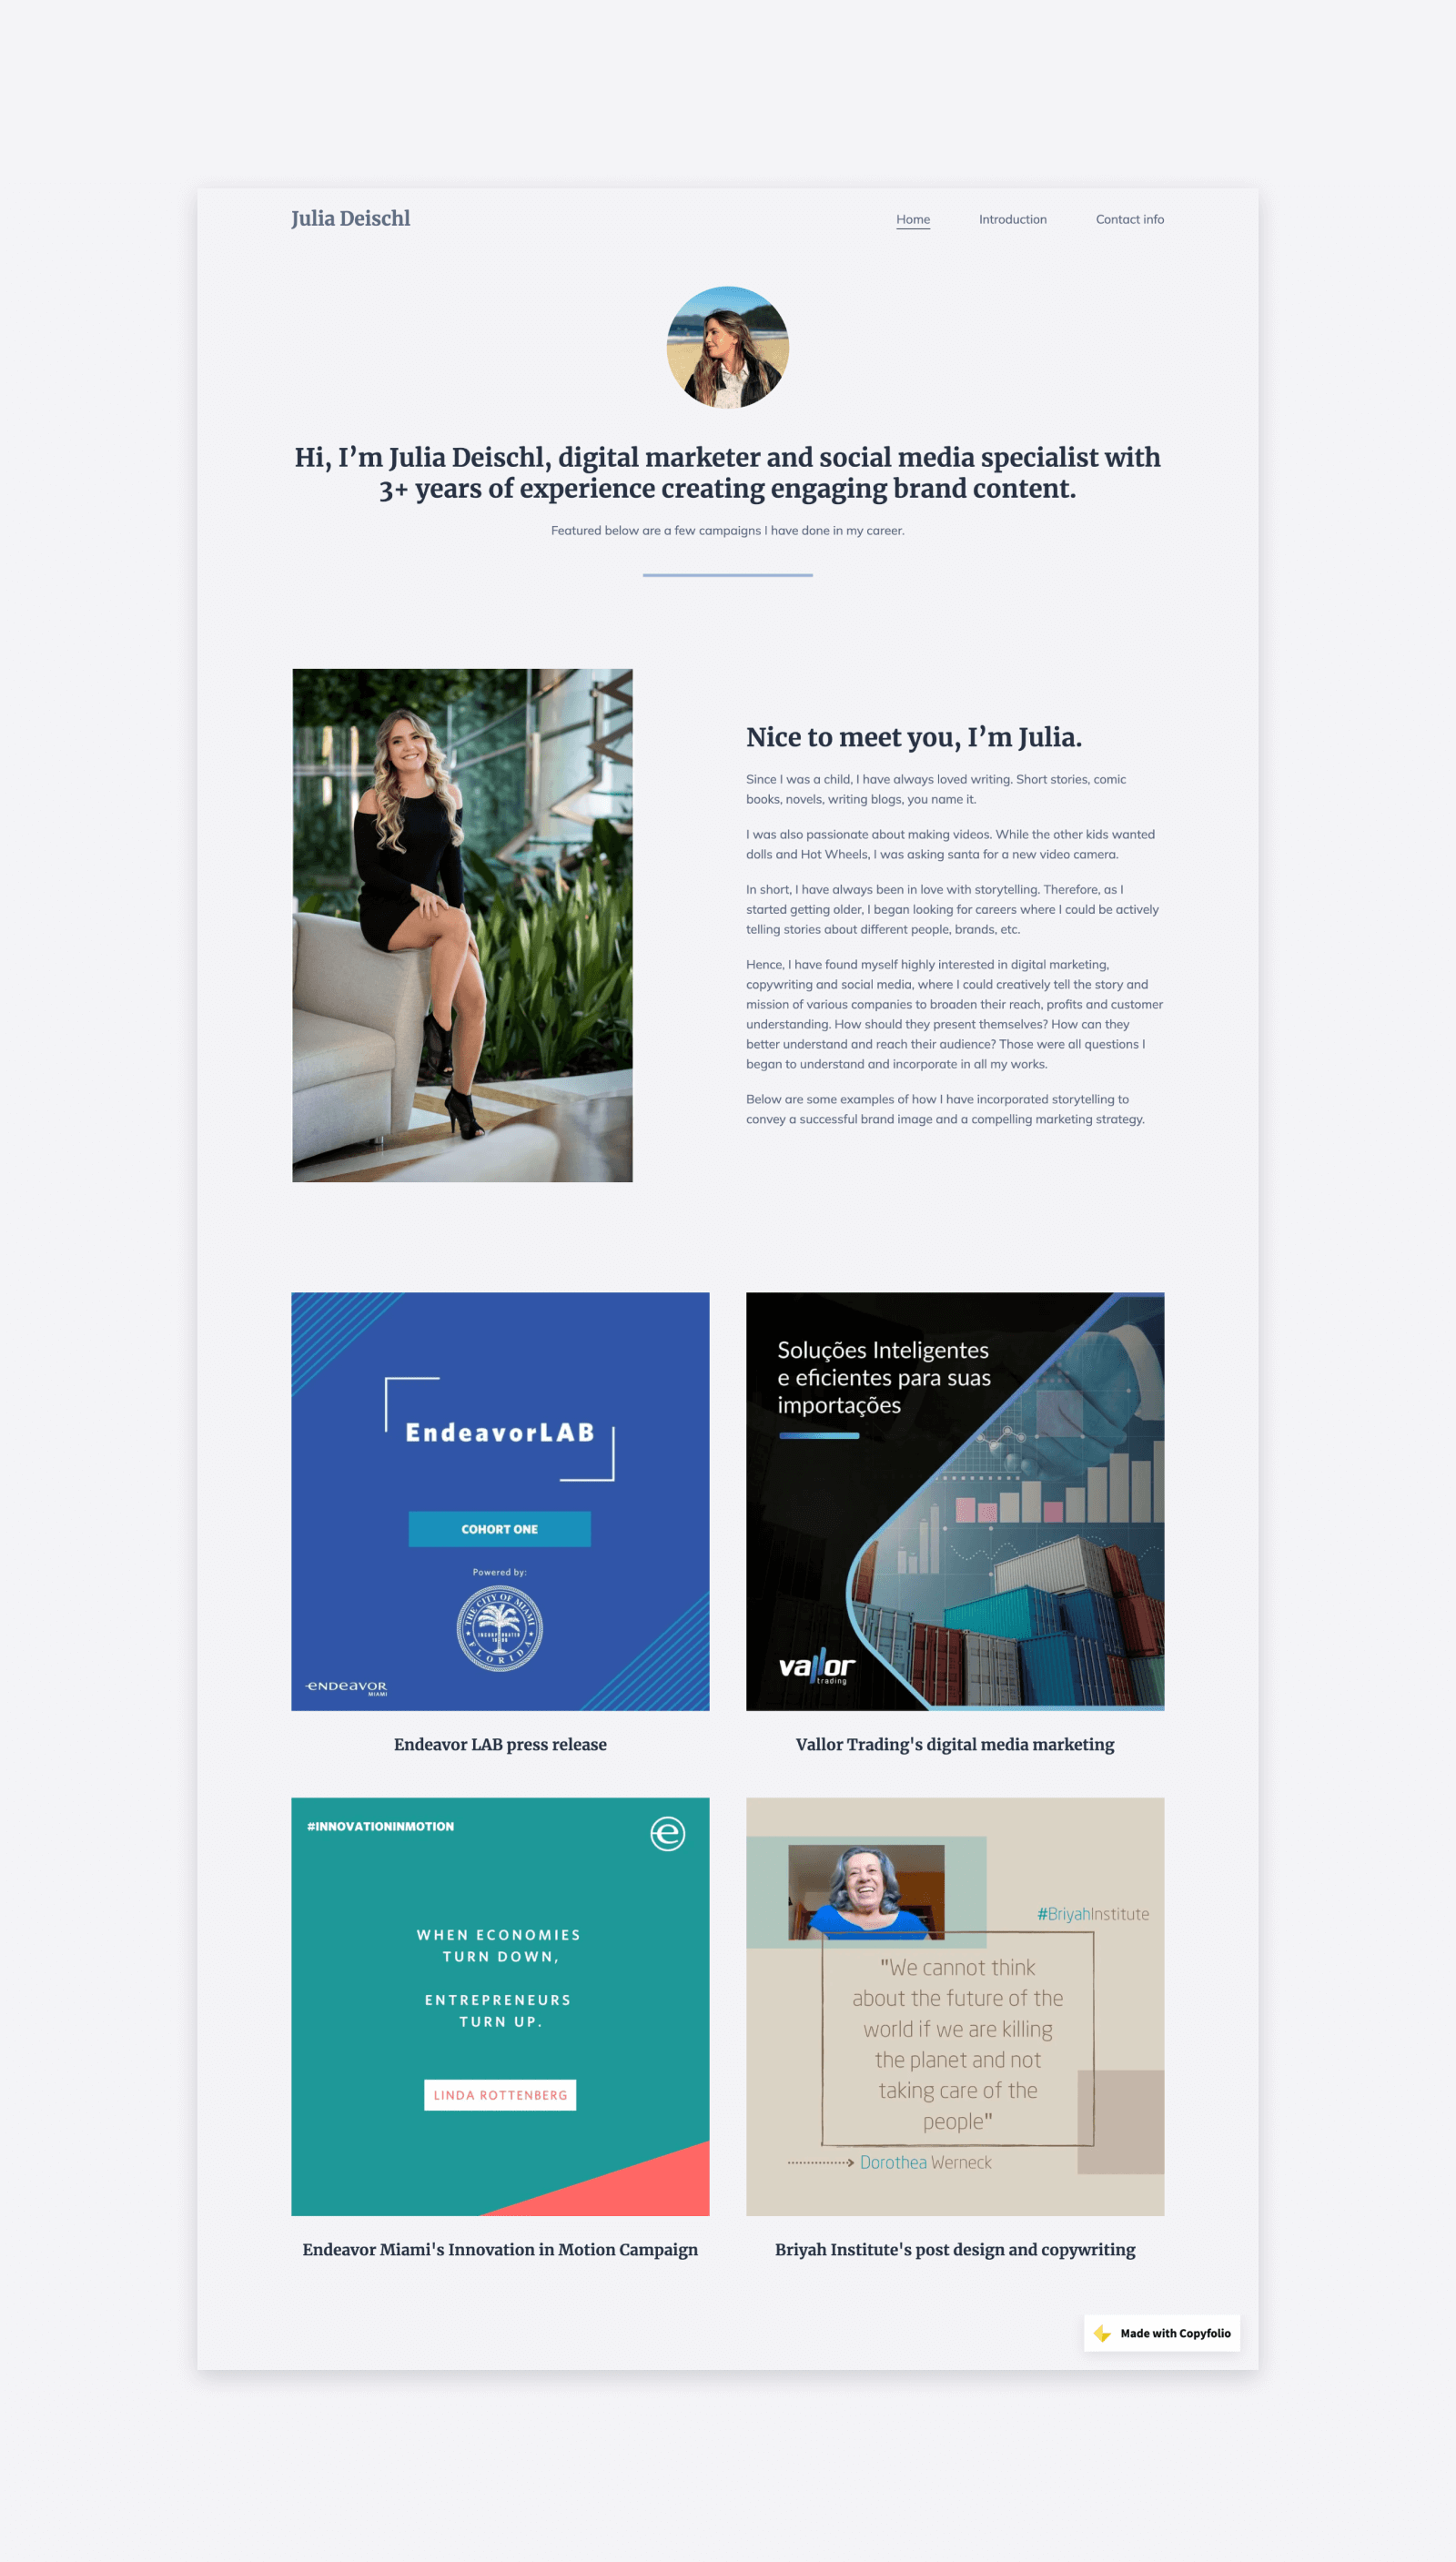 A portfolio website with a profile picture, tagline, about me section with a photo, and marketing projects showcased in a grid